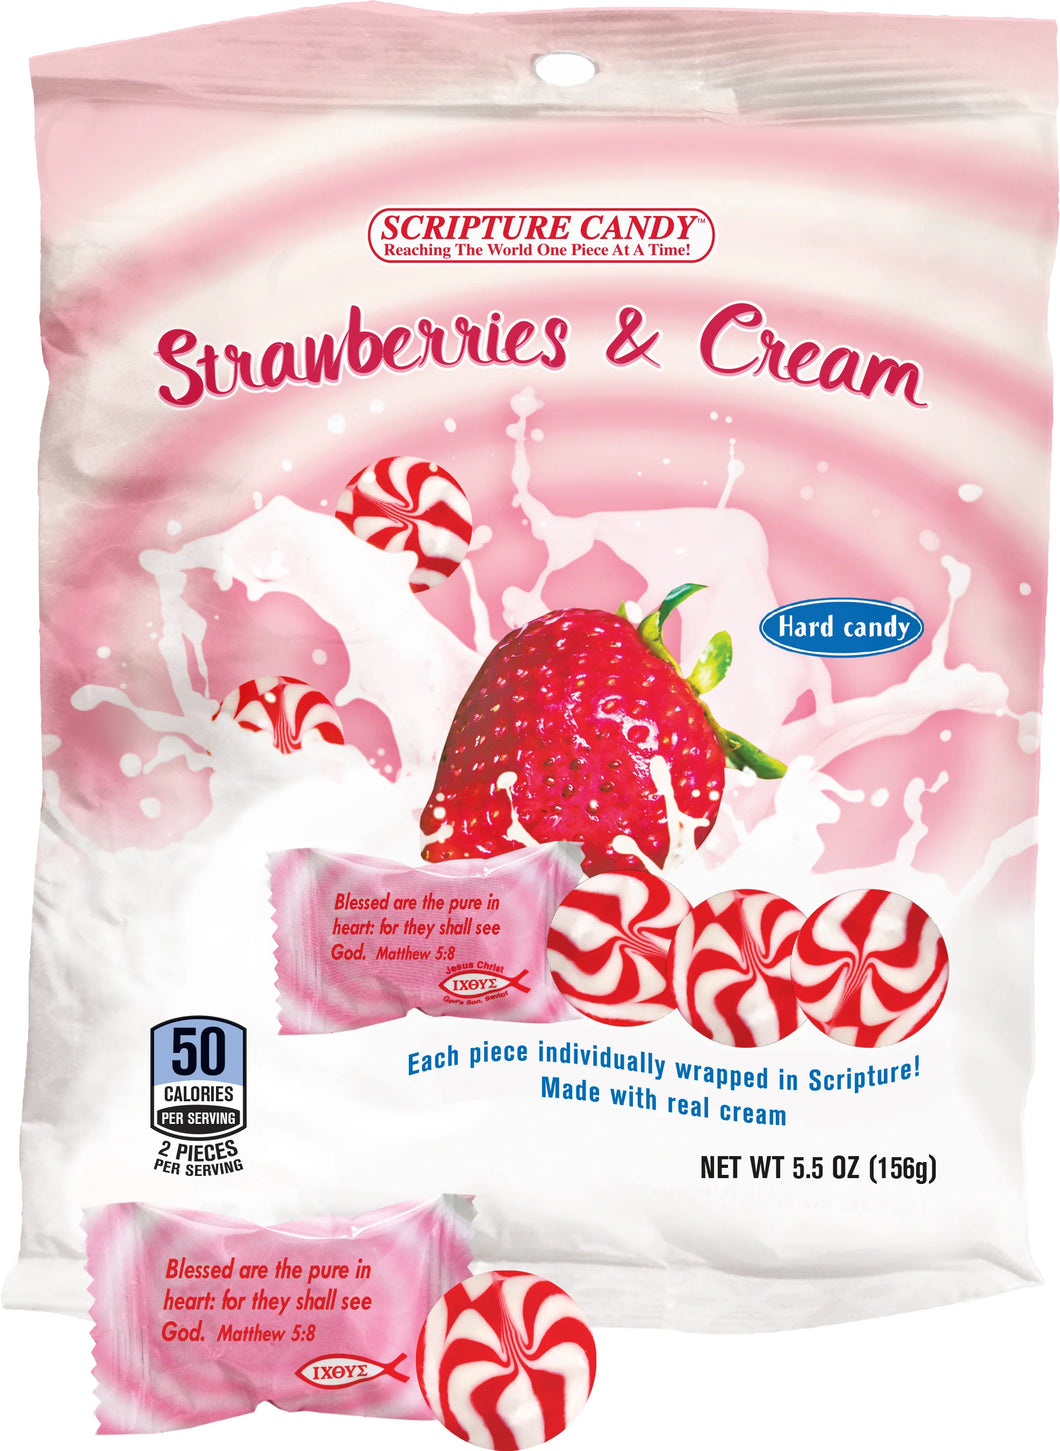 Strawberry & Cream Hard Candy 5.5 Ounce Bag, 25 Pieces